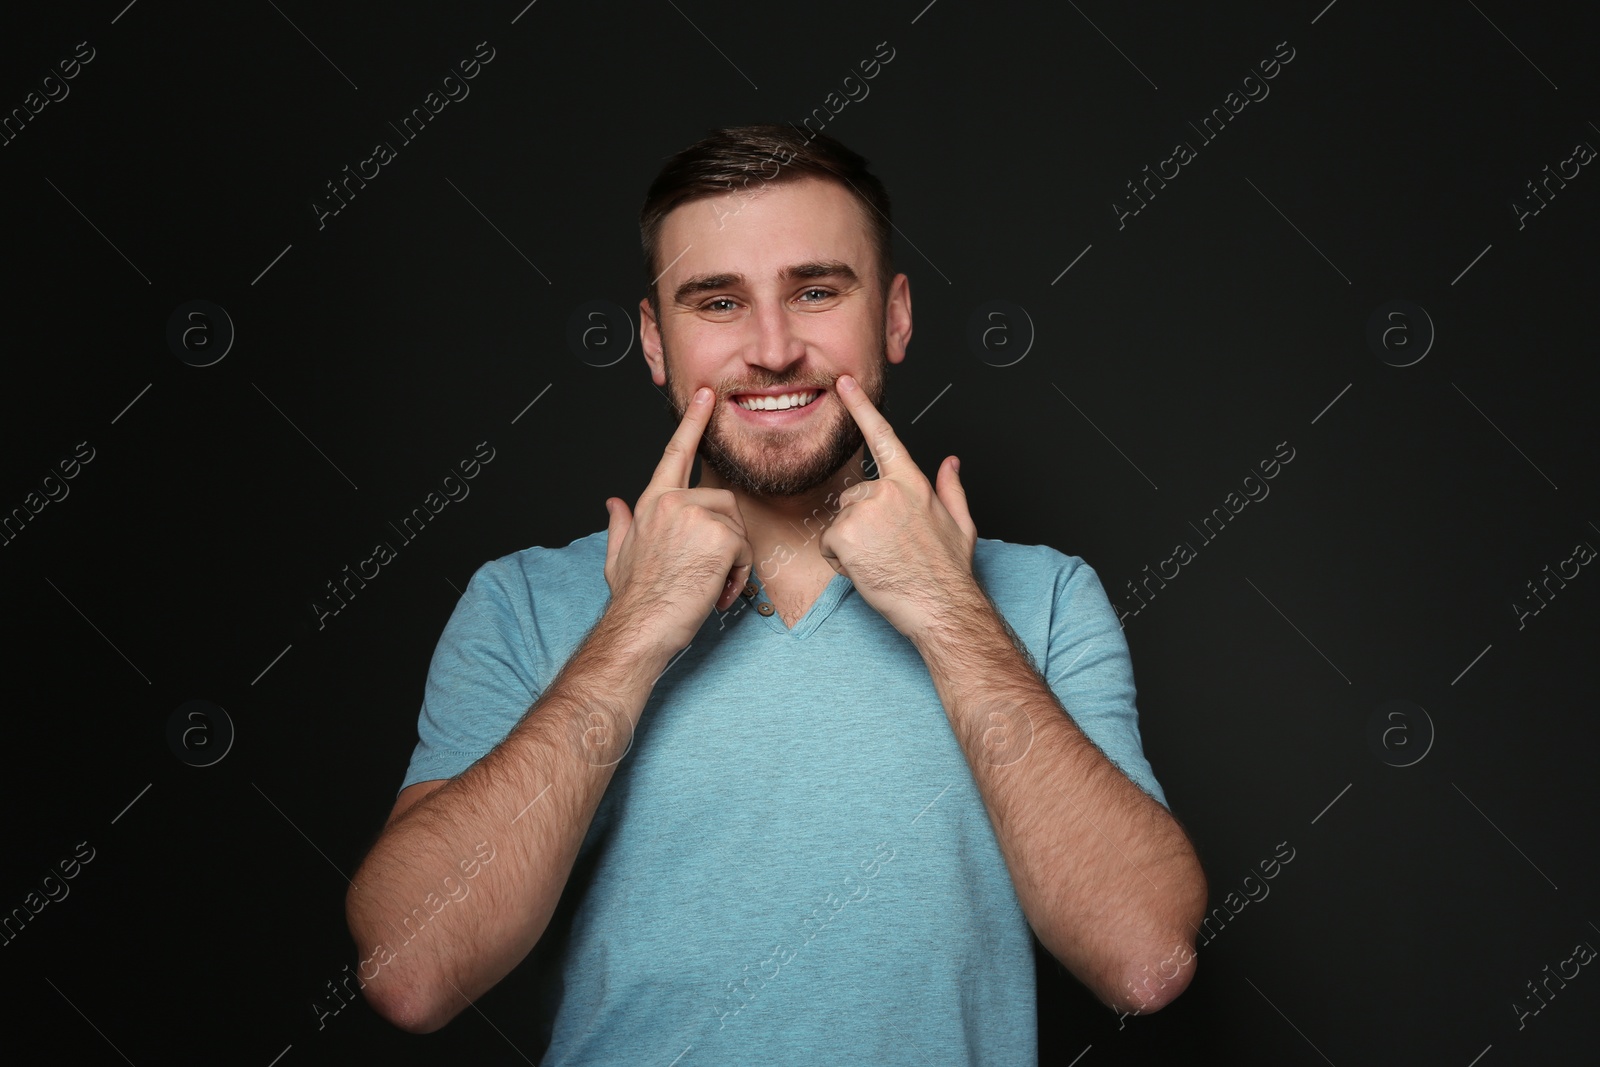 Photo of Man showing LAUGH gesture in sign language on black background